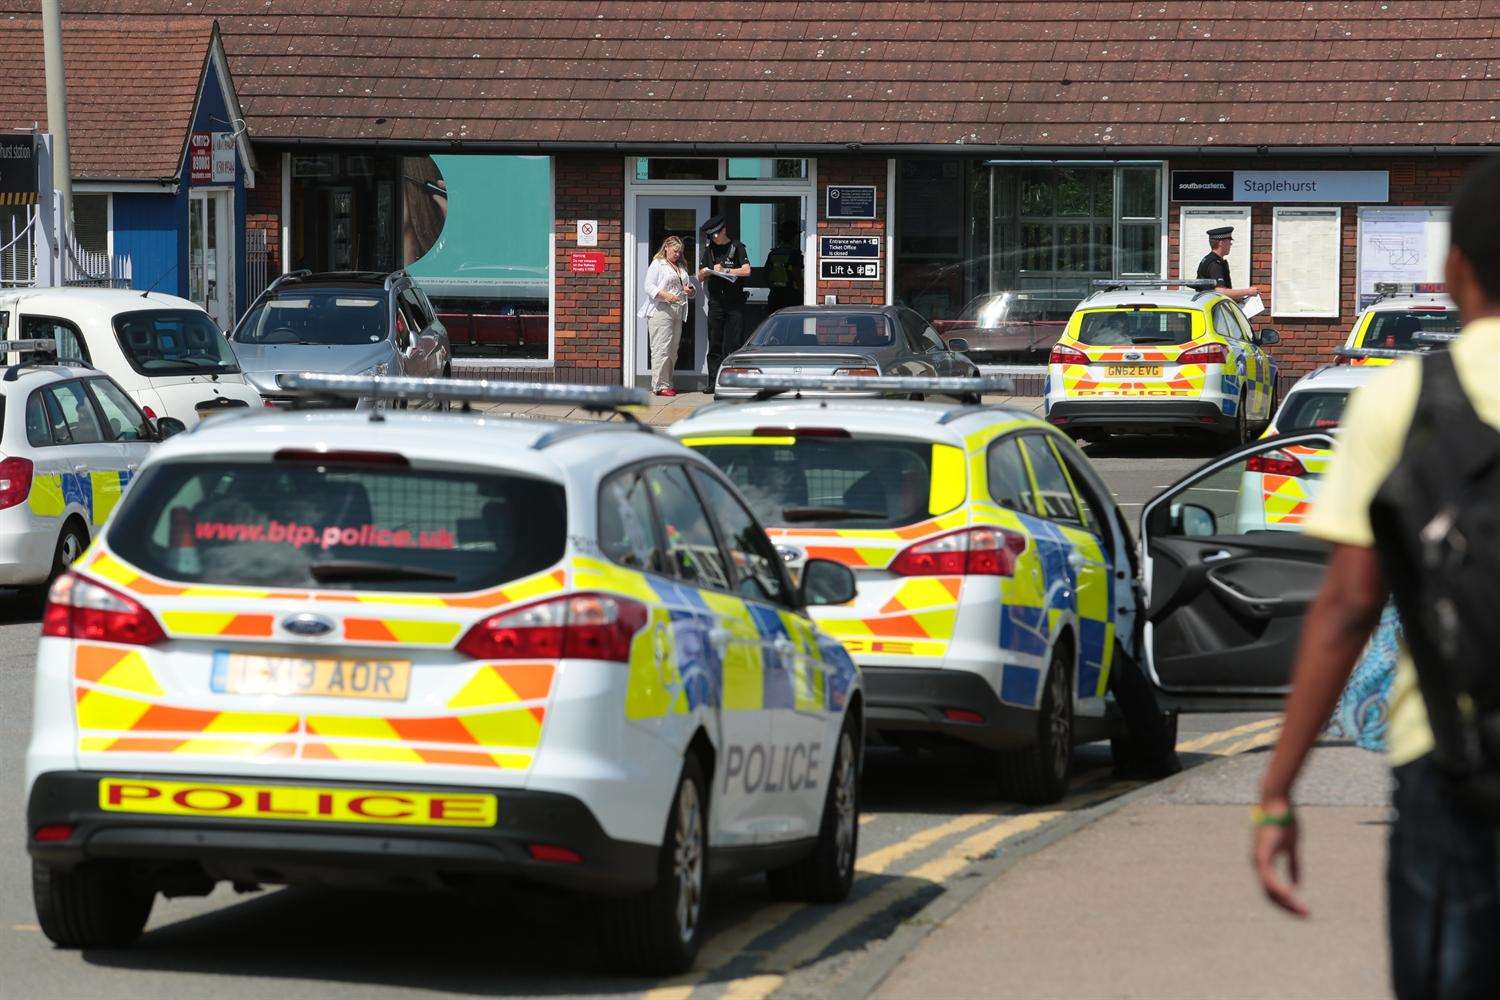 Emergency services at Staplehurst station after Ms Burnham's death. Picture by: Martin Apps